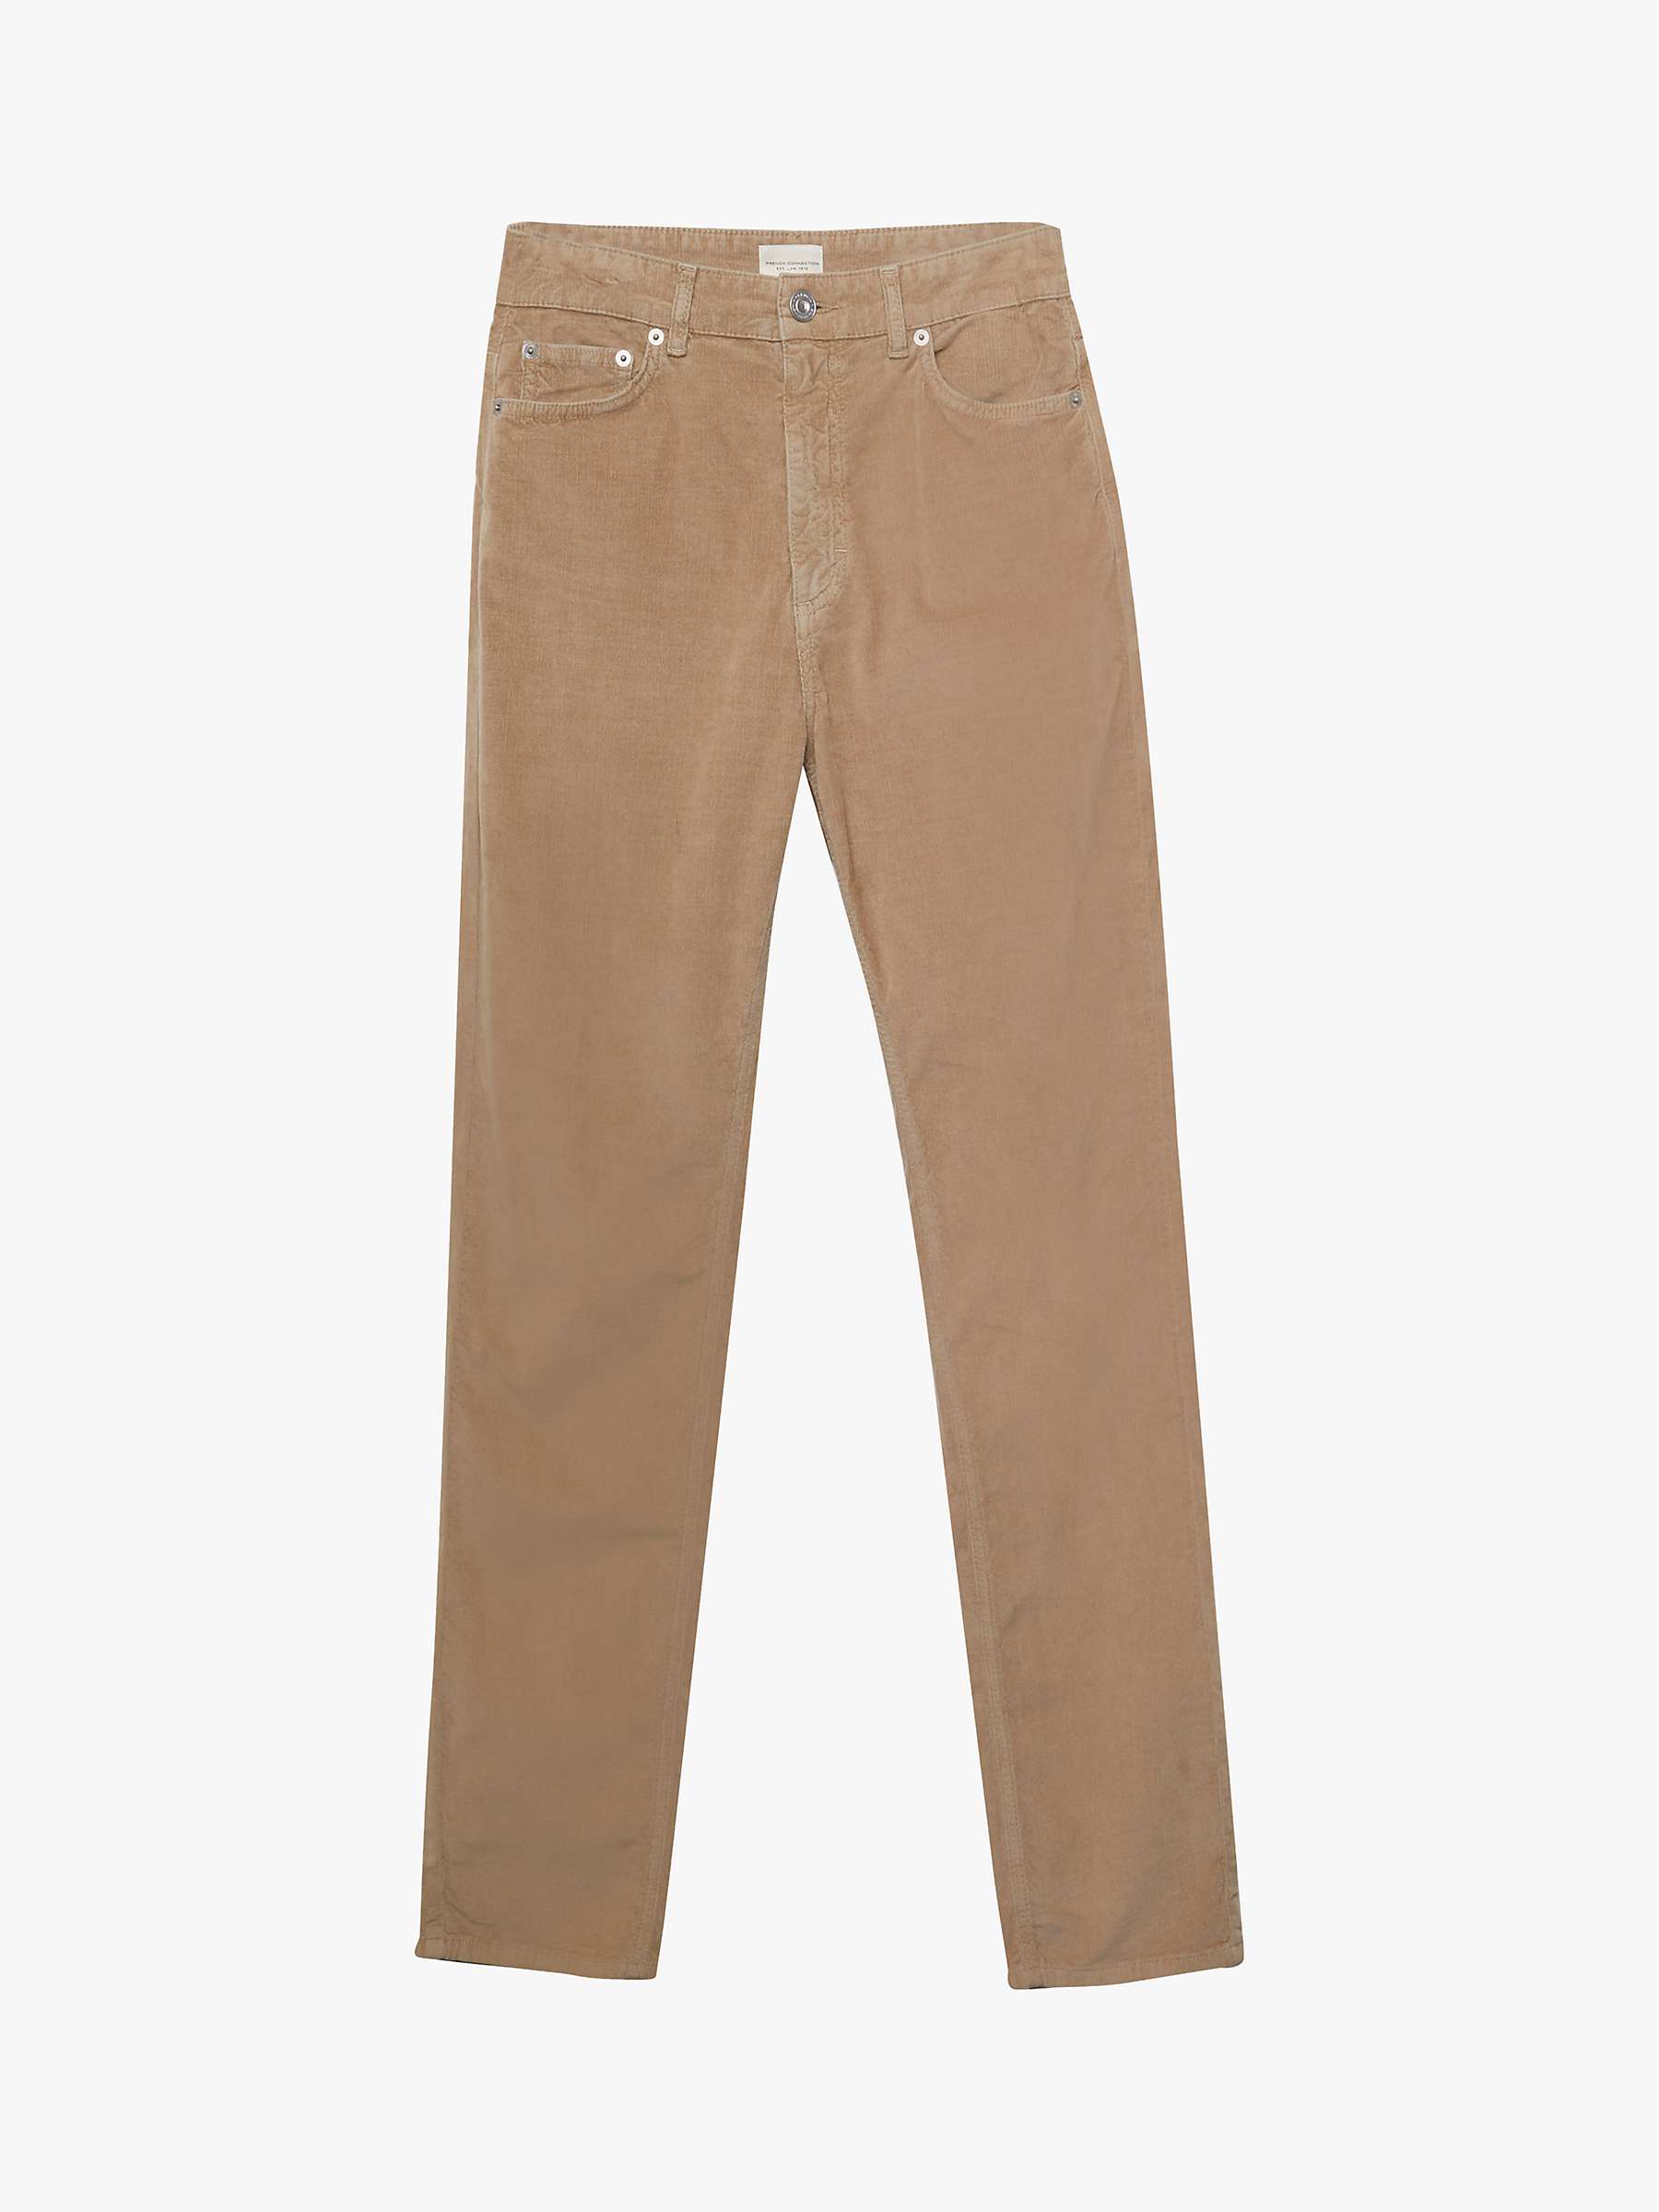 Buy French Connection Paula Corduroy Trousers Online at johnlewis.com